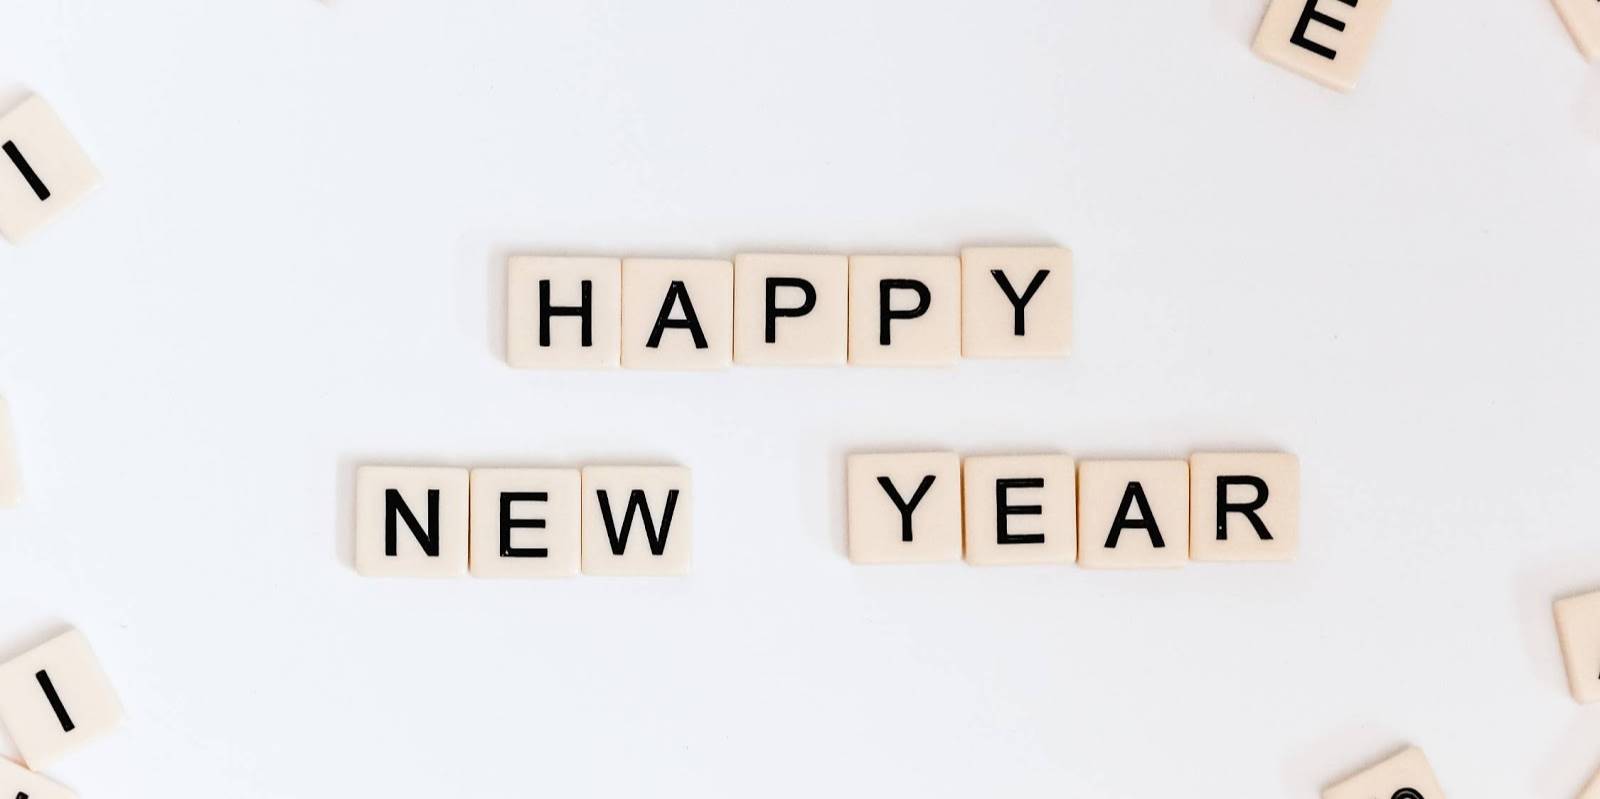 Creating community New Year’s resolutions